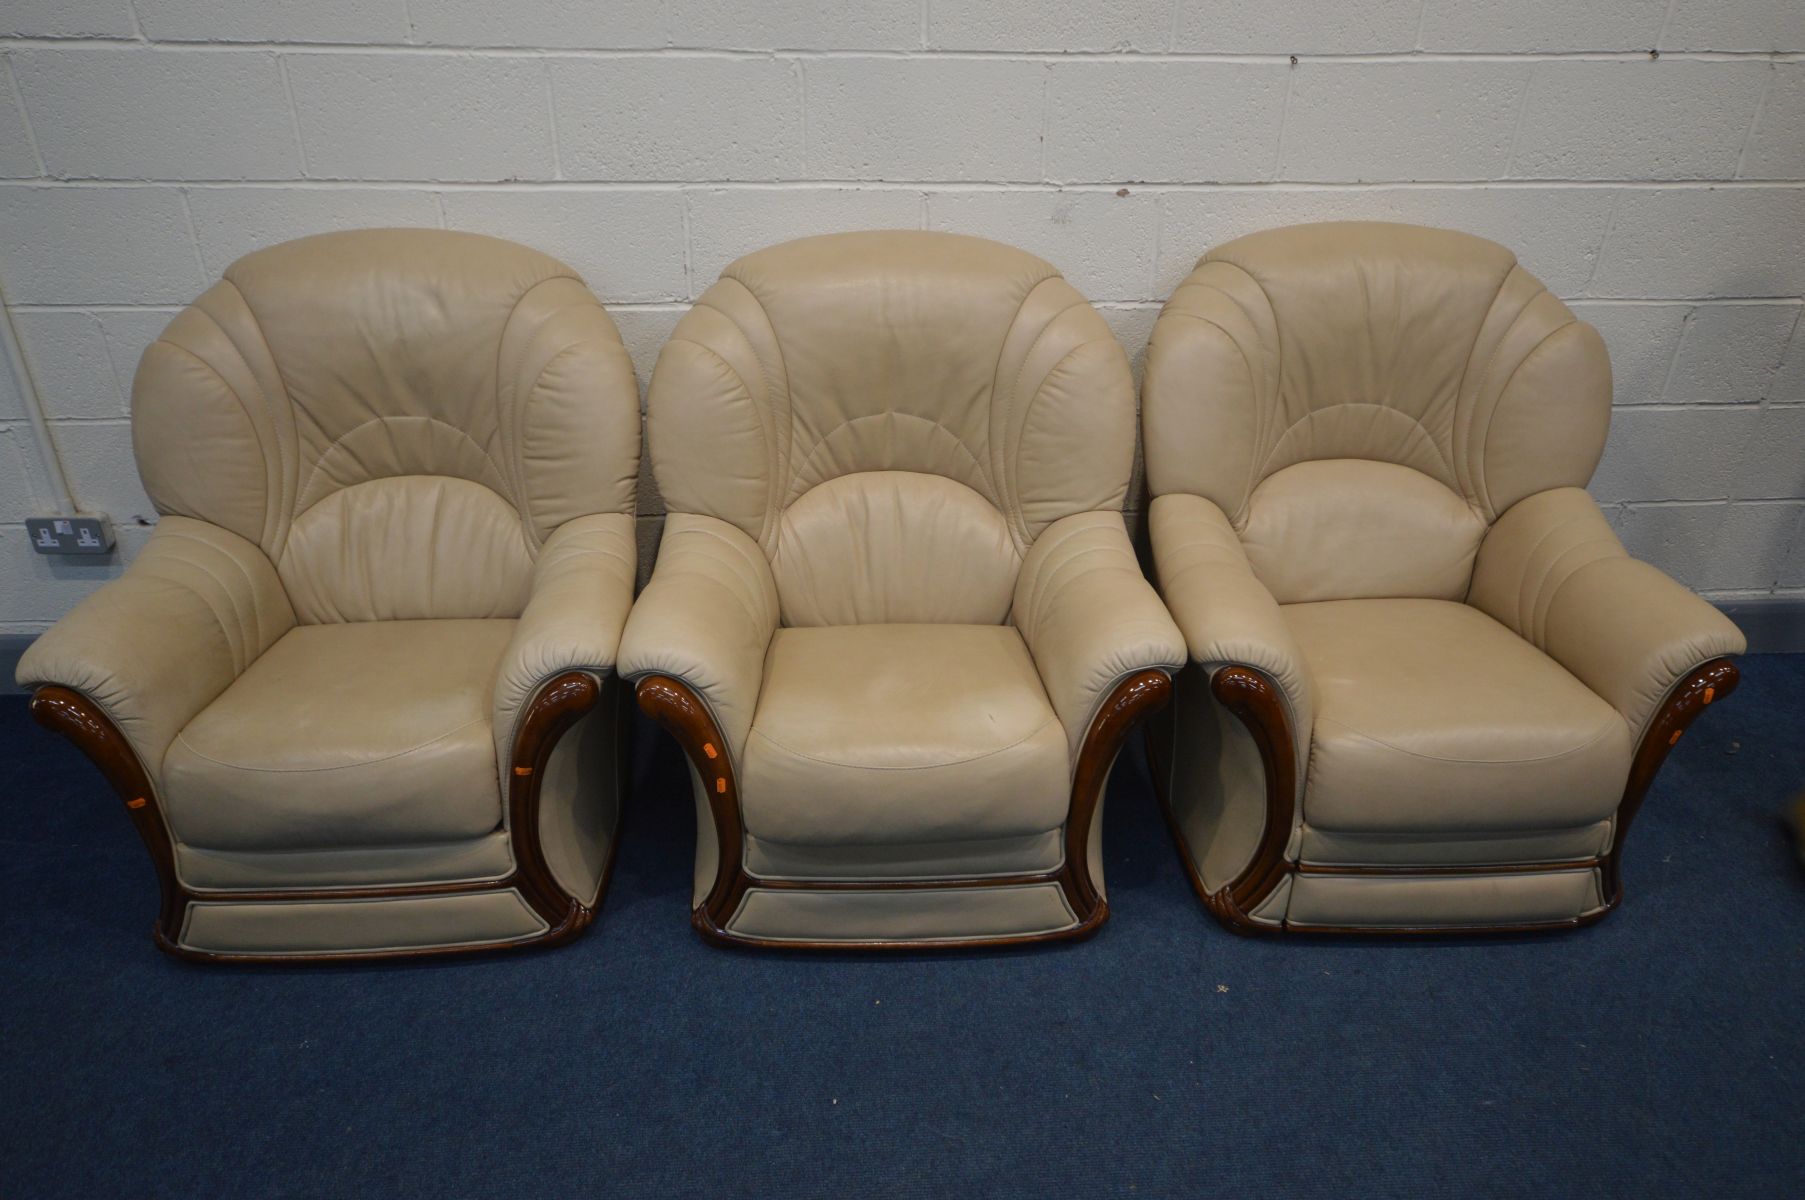 A RECLINING BIEGE LEATHER AND WOOD FRAMED MANUAL RECLINING ARM CHAIRS, and two matching armchairs (